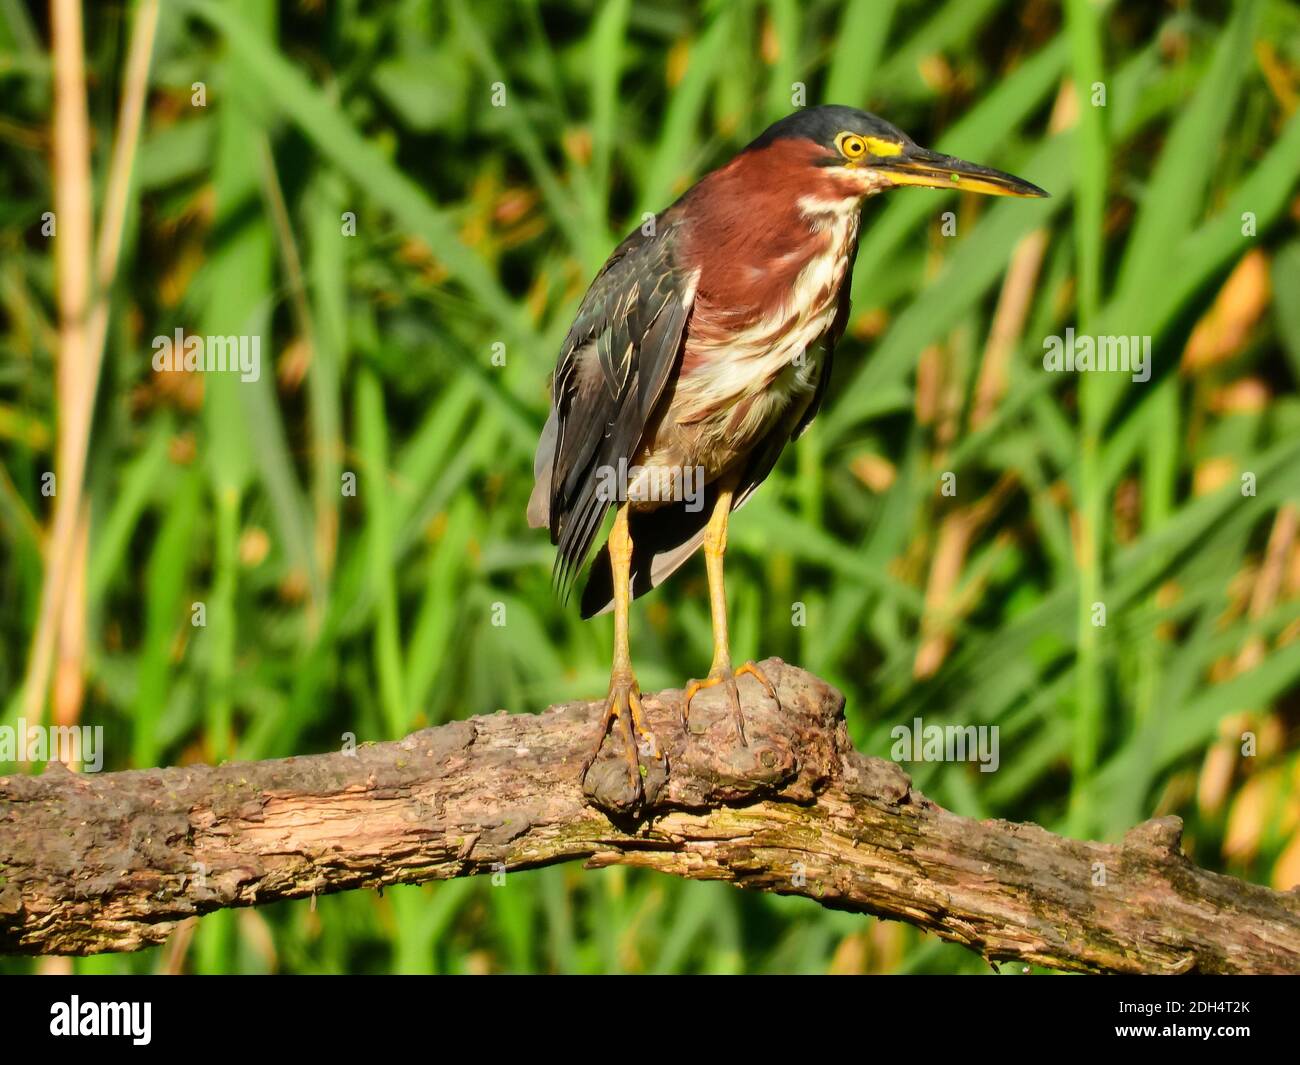 Green Heron Bird Perched on Broken Tree Log in Front of Cattails with Algae Bloom on Beak Stock Photo